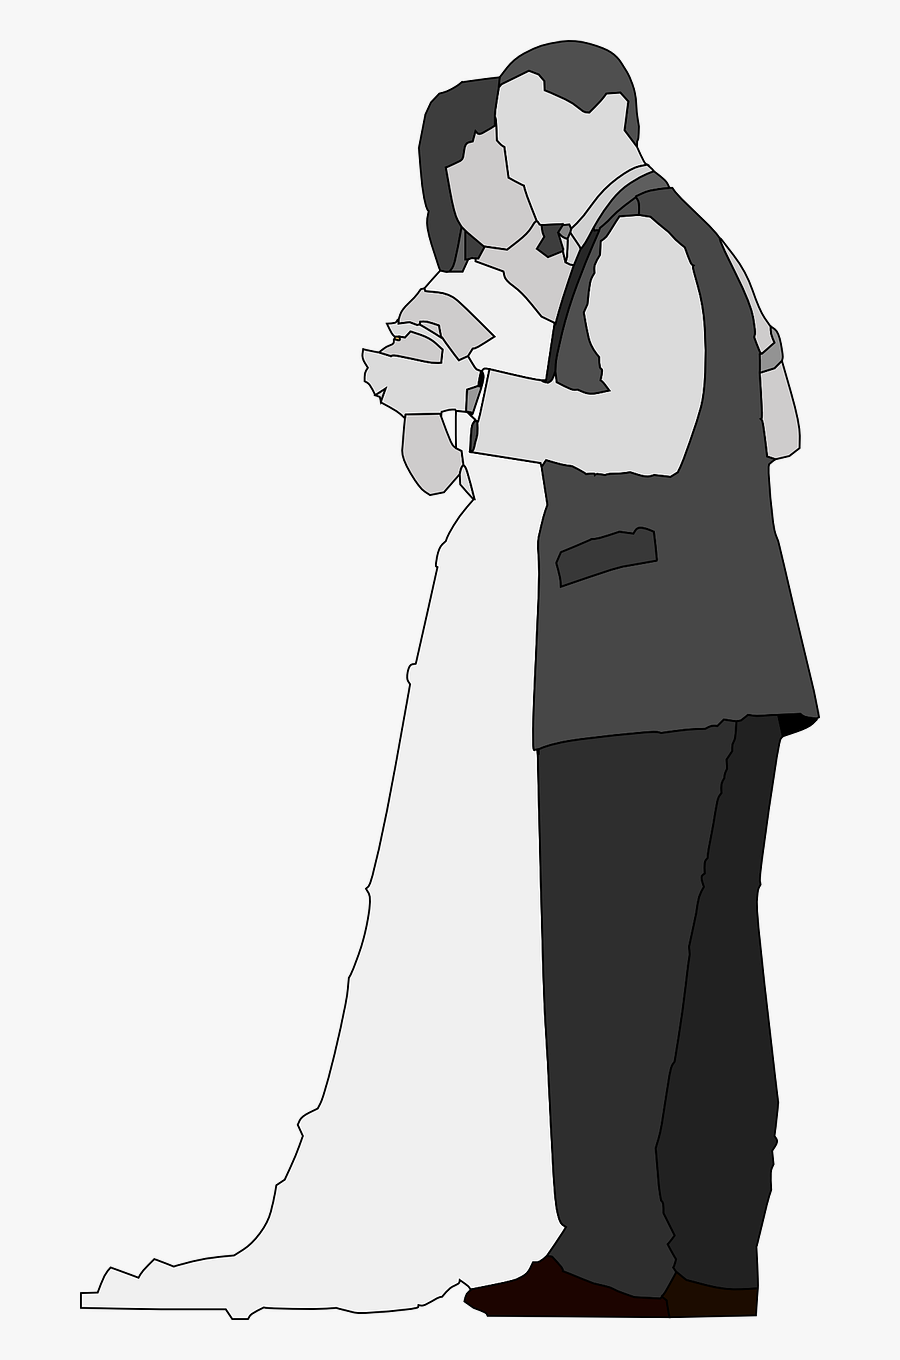 Wedding Groom Bride Free Picture - Man And Woman Dancing Clip Art, Transparent Clipart